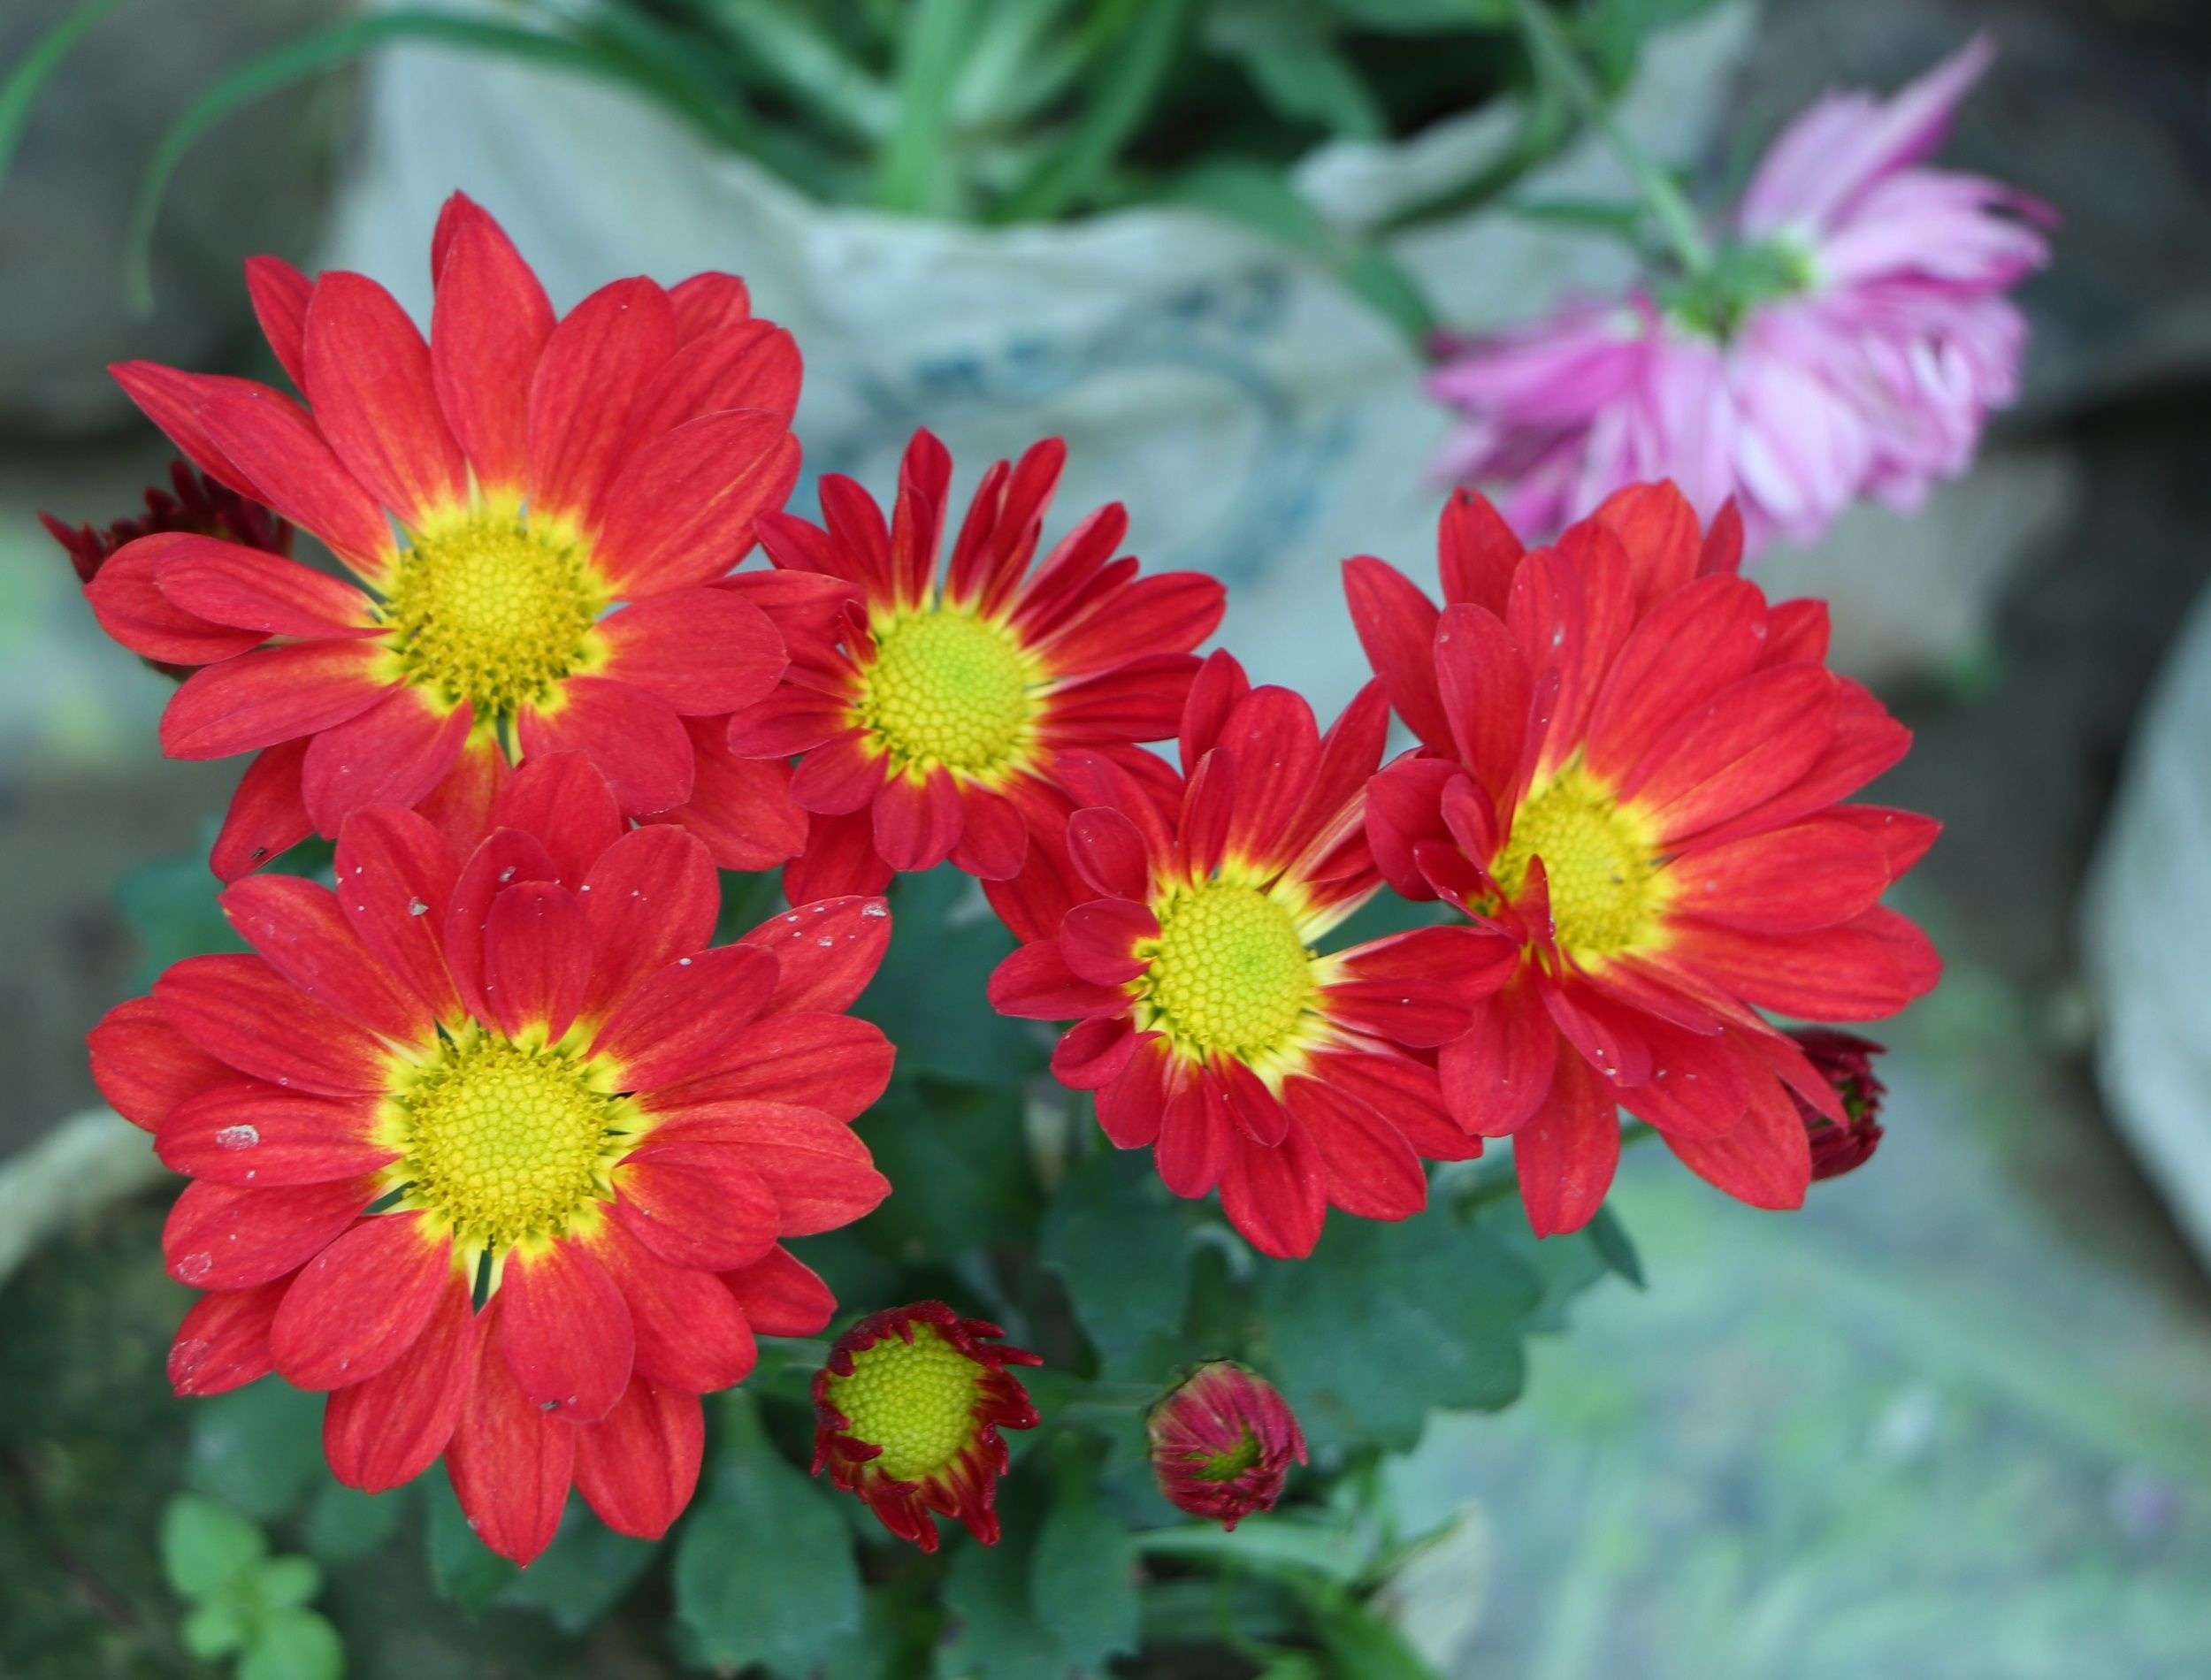 Red and Yellow-orange chrysanthemums on a blurry background close-up. Beautiful bright chrysanthemums bloom in autumn in the garden. Chrysanthemum background with a copy of the space.